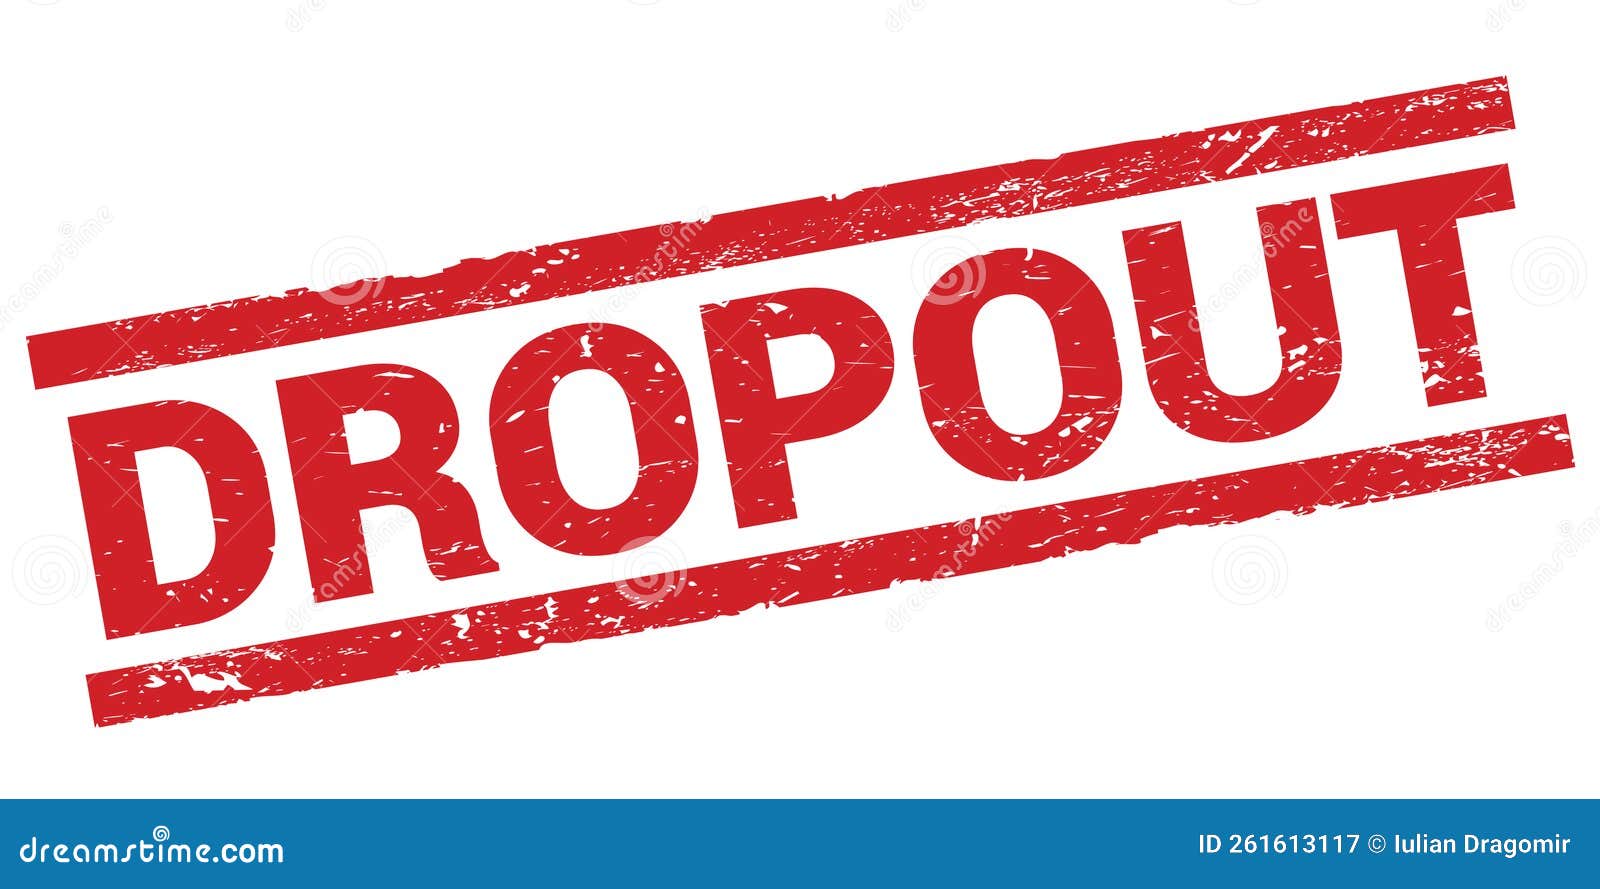 dropout text on red rectangle stamp sign